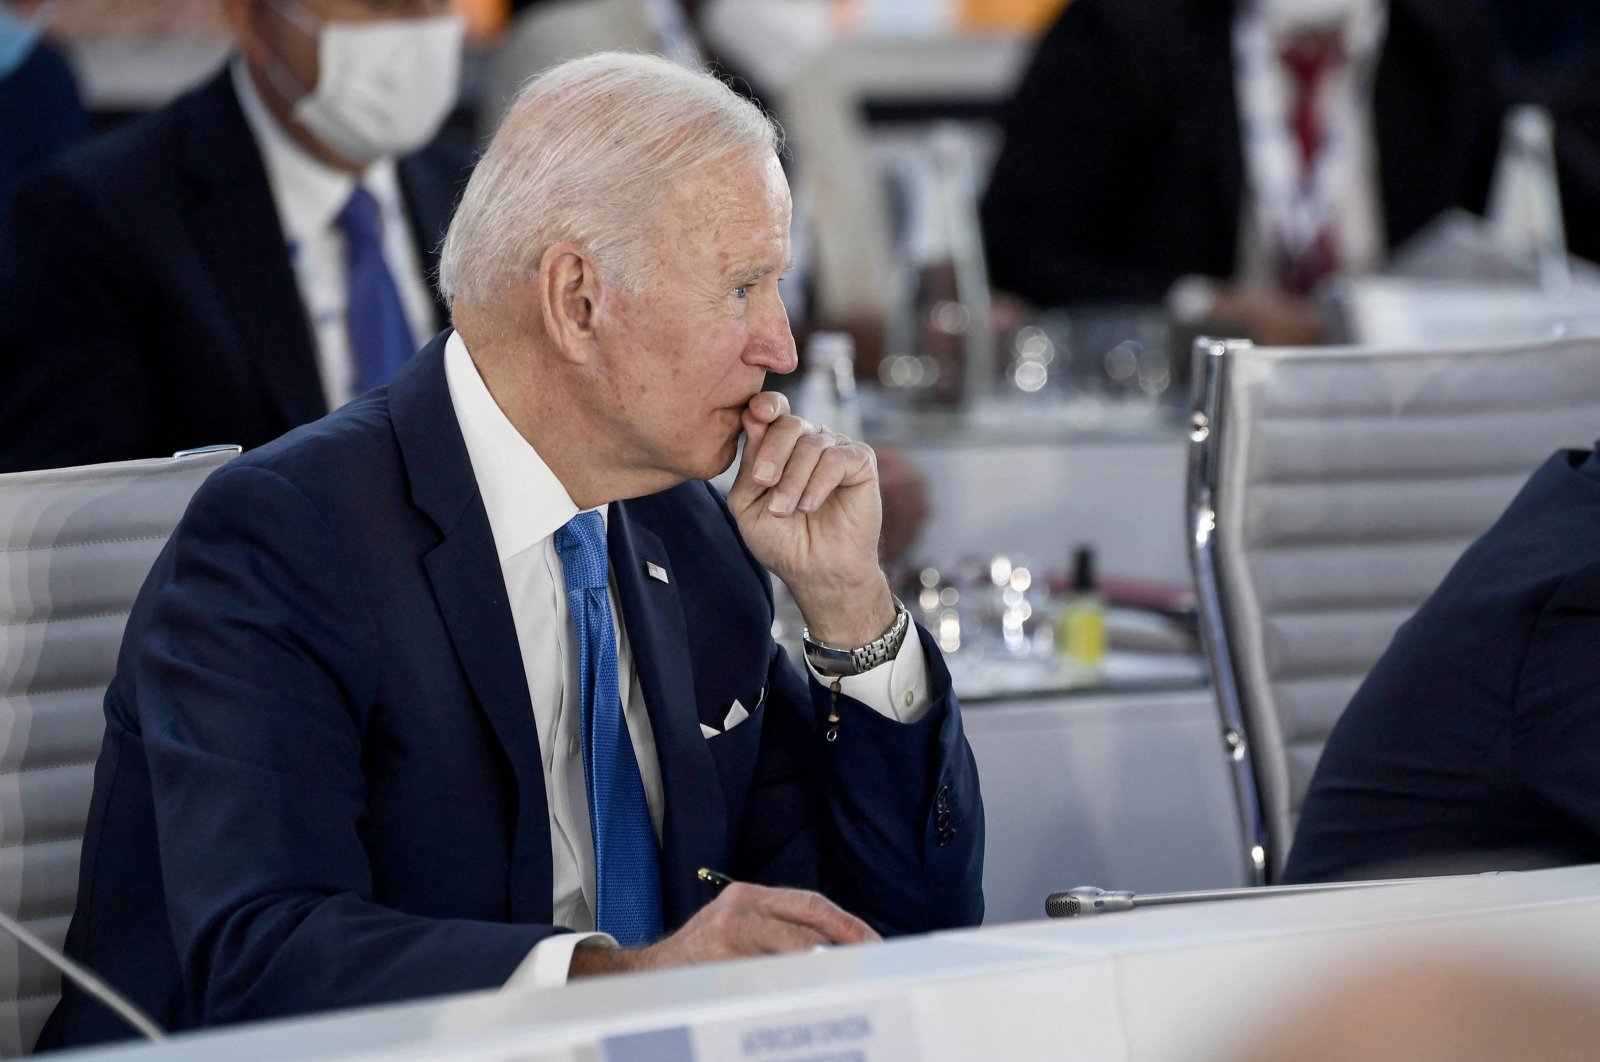 U.S. President Joe Biden reacts during a meeting at the G-20 leaders' summit in Rome, Italy, Oct. 30, 2021. (Photo by AFP)